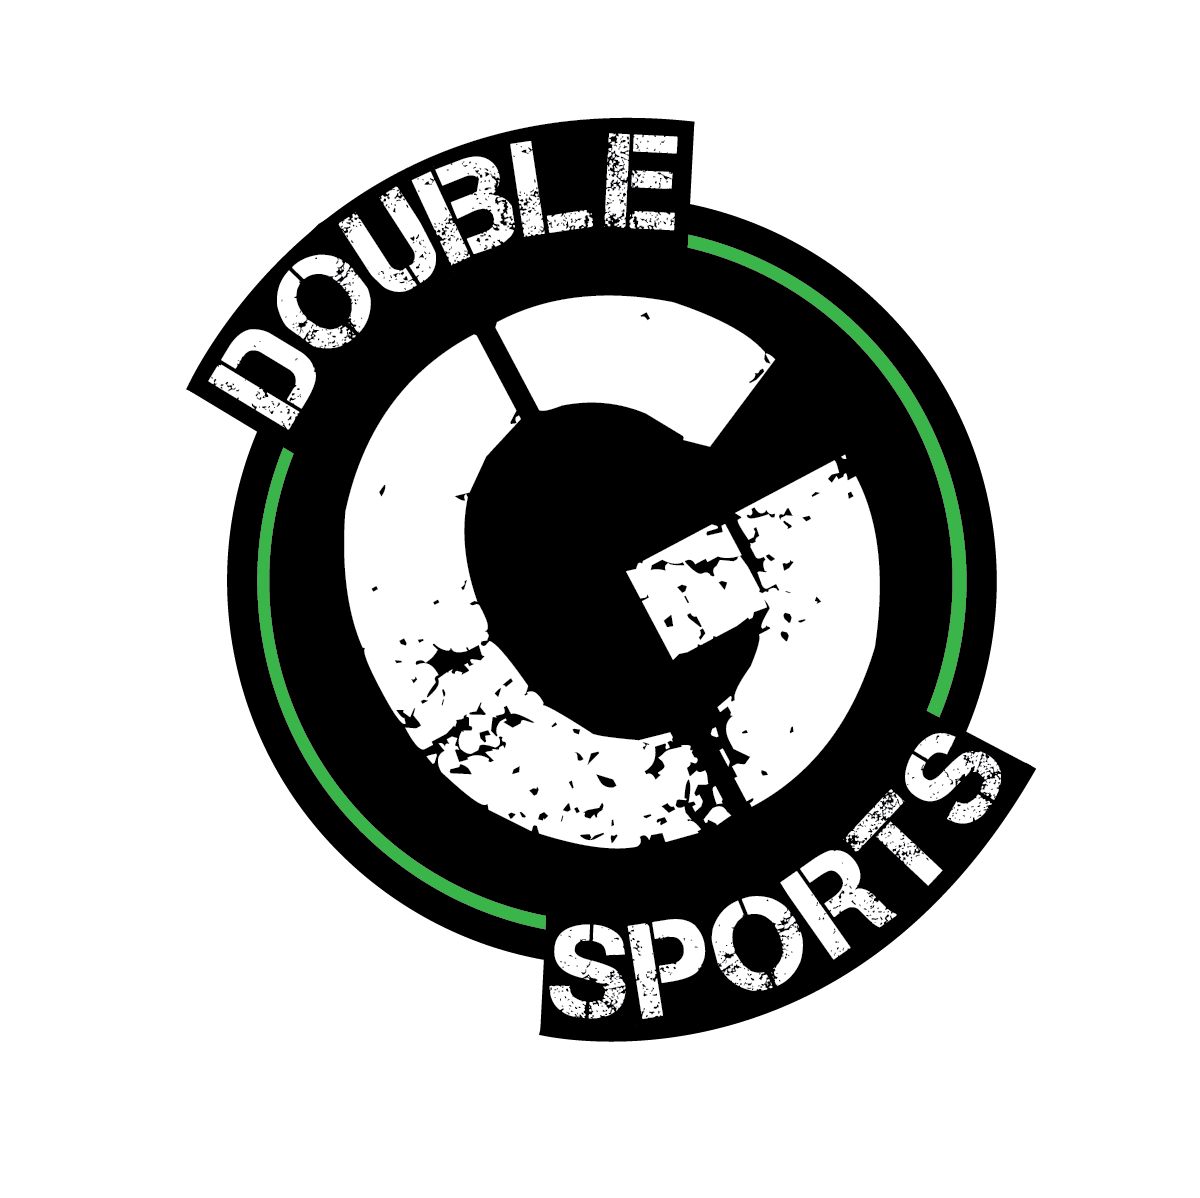 G Sports Logo - Double G Sports Finalizes their NEW logo! - KB Productions